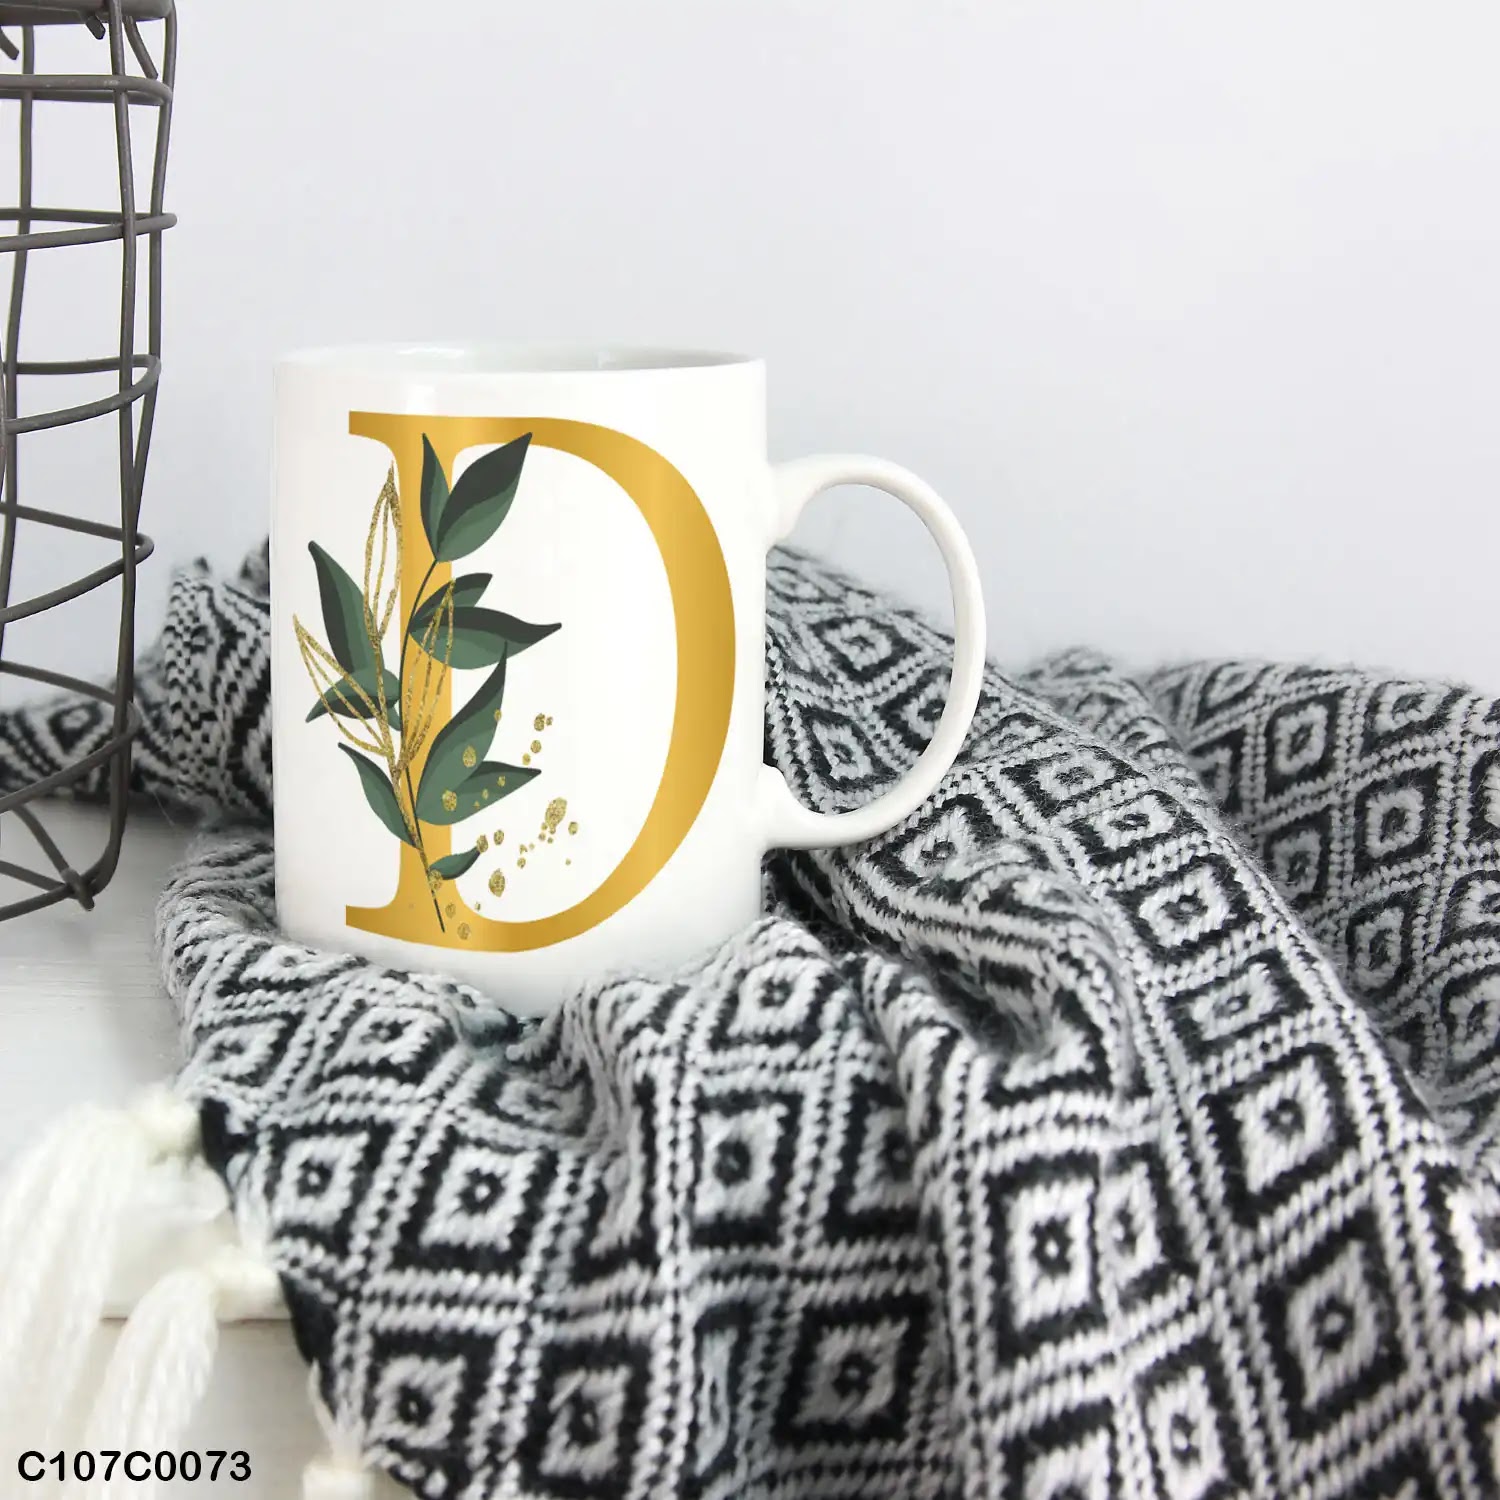 A white mug (cup) printed with gold Letter "D" and small green branch